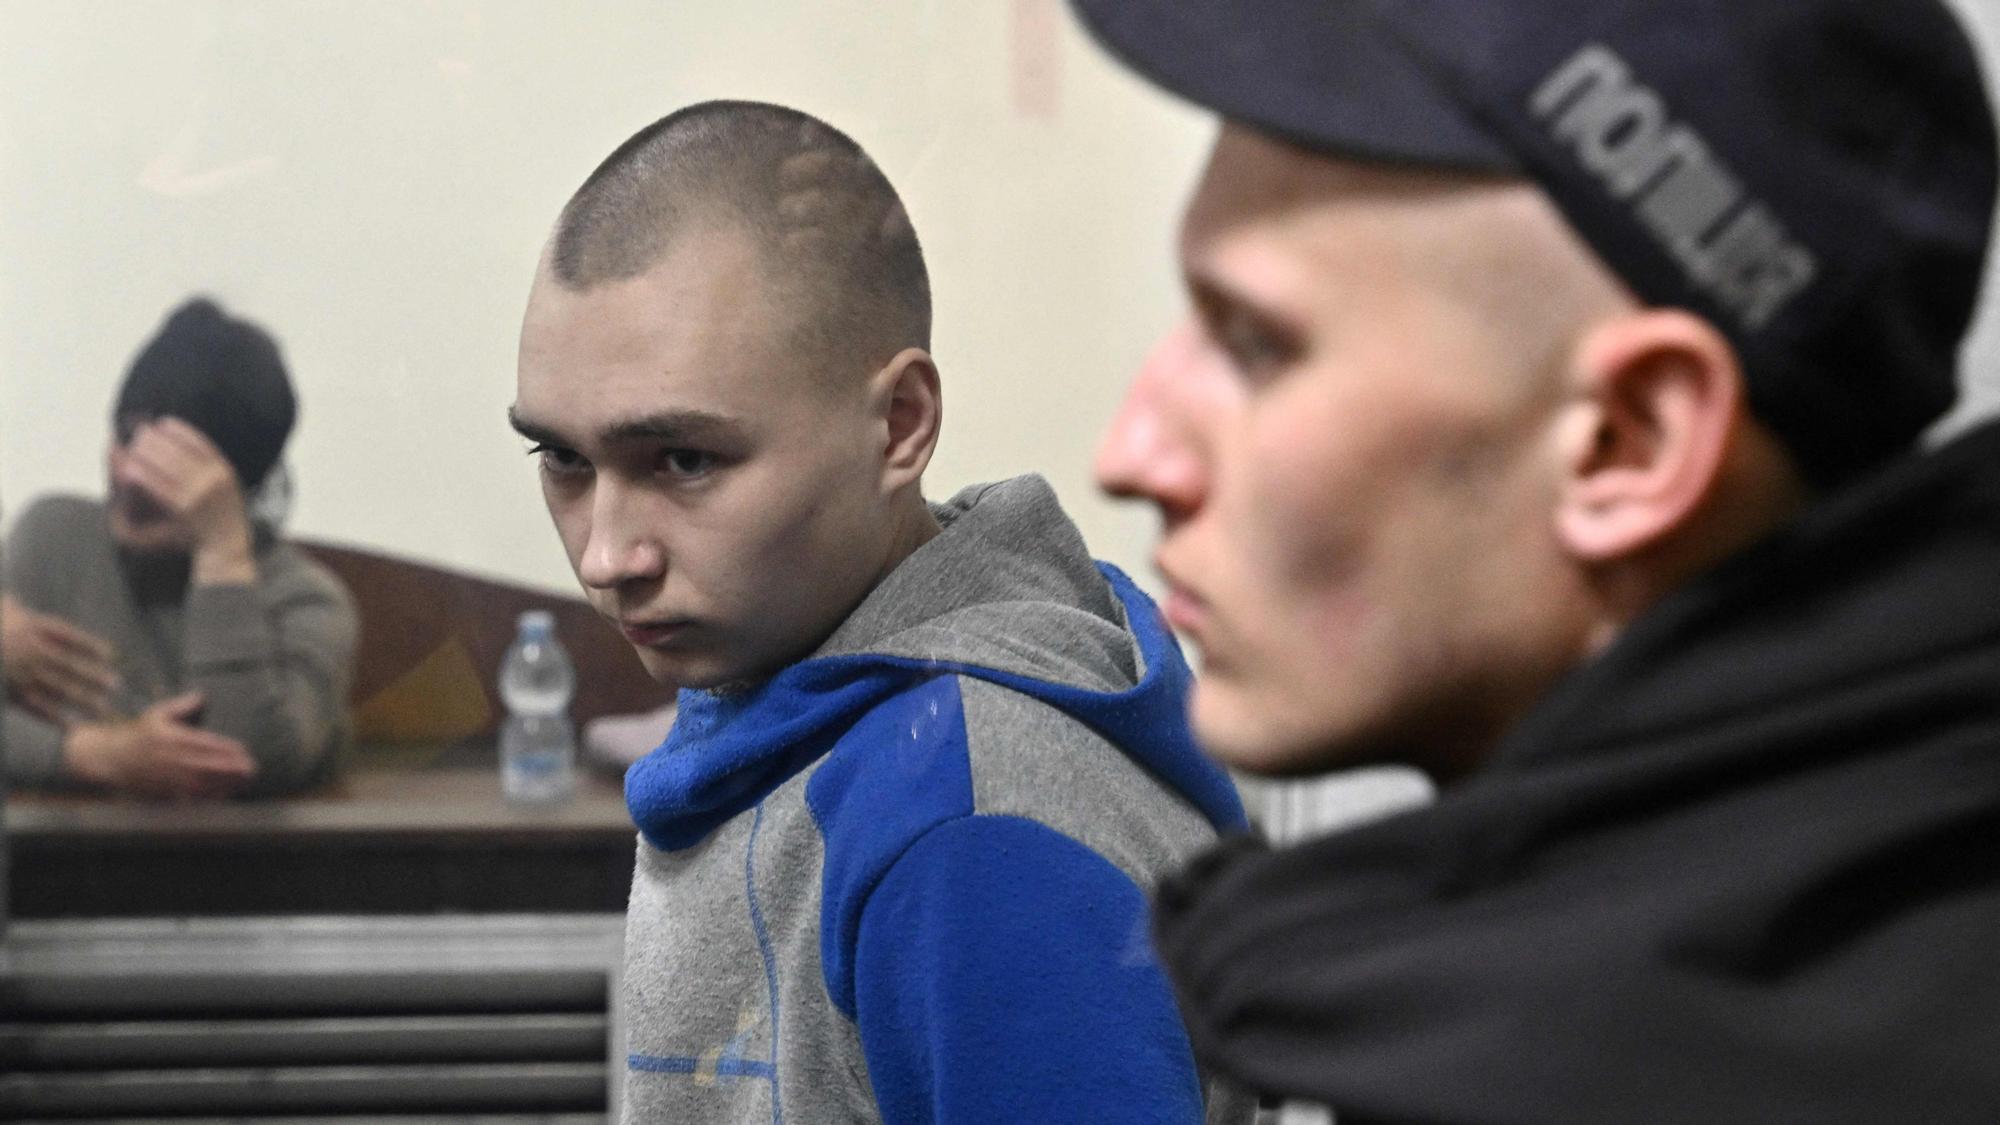 Russian soldier Vadim Shishimarin (C) looks on from the defendant's box at the opening of his trial on charge of War crimes for having killed a civilian, as his widow Kateryna Shelipova (L) reacts, in the Solomyansky district court in Kyiv on May 18, 2022. - The captured soldier is accused of killing a 62-year-old civilian -- allegedly on a bicycle -- near the village of Chupakhivka in the northeastern Ukraine Sumy region on February 28, in the first days of the Russian's offensive. Shishimarin pleaded guilty and is facing possible life imprisonment in Kyiv. (Photo by Genya SAVILOV / AFP)